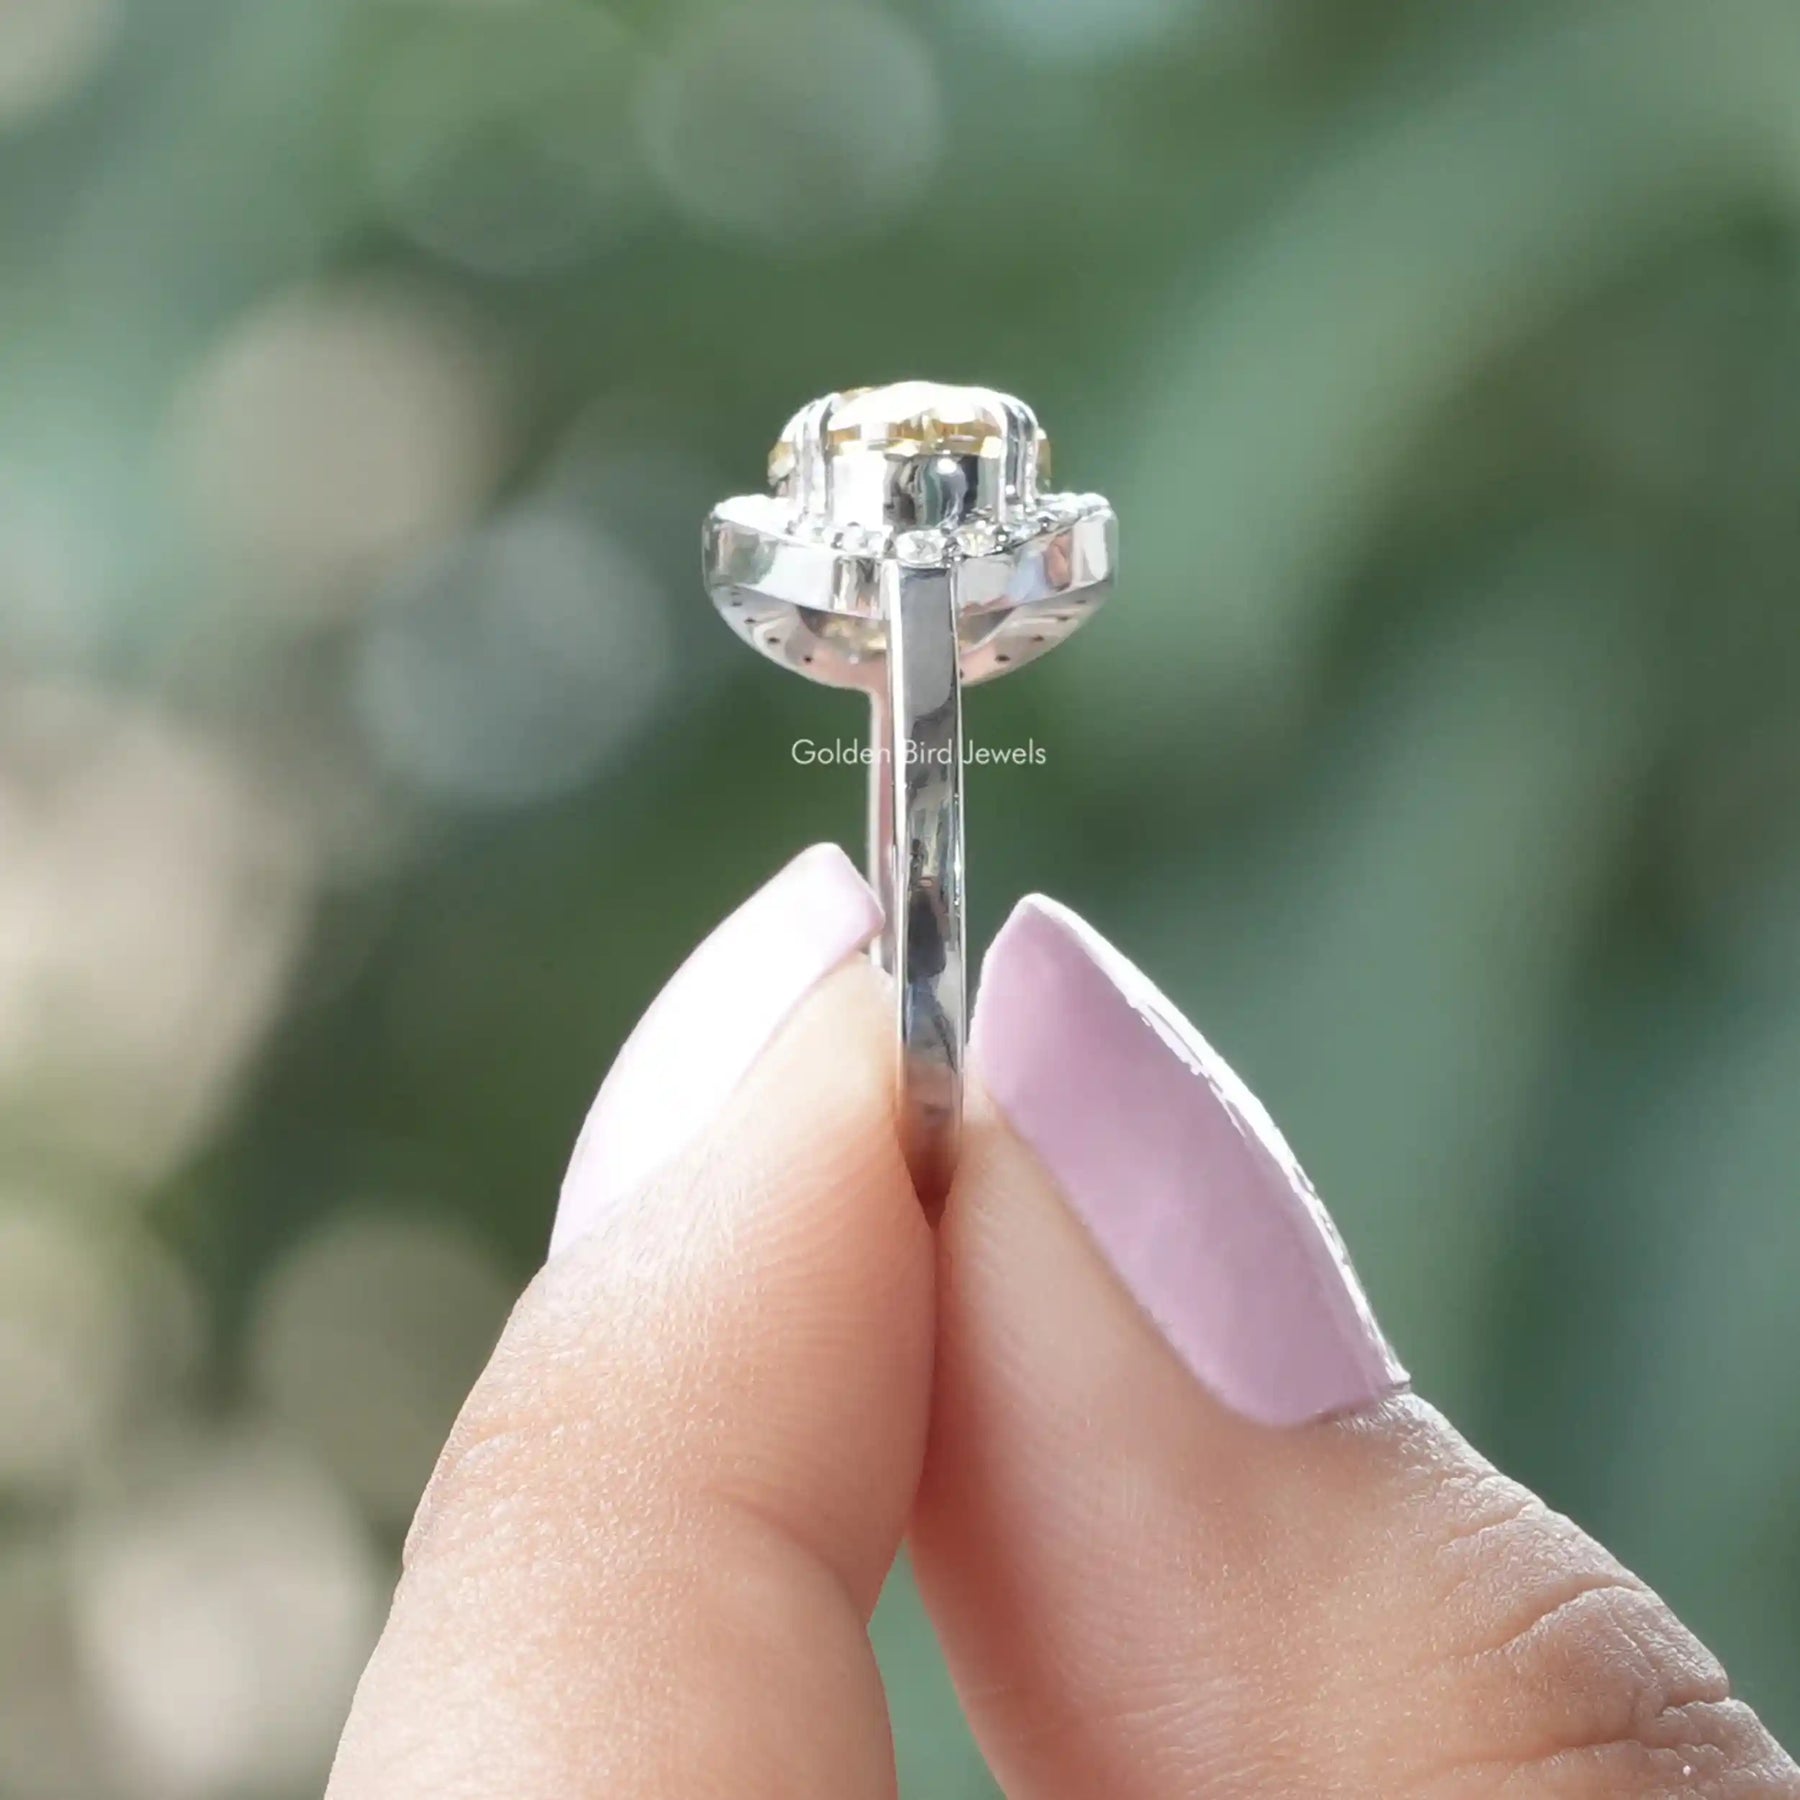 [Side view of old mine oval cut moissanite halo ring]-[Golden Bird Jewels]